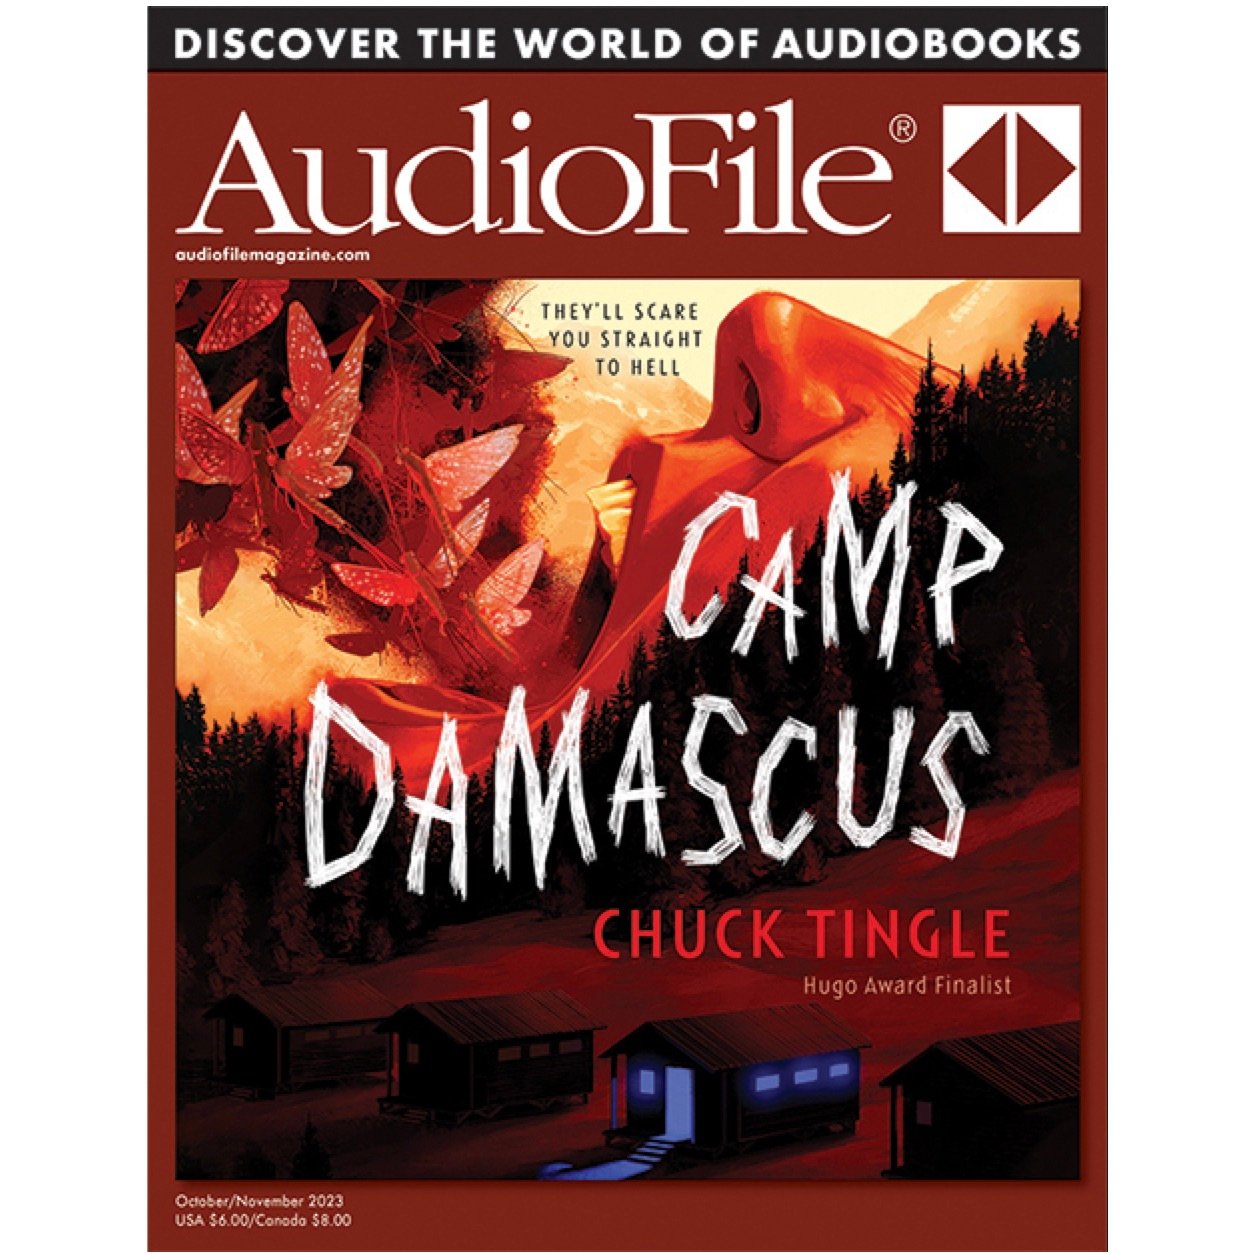 Search Audiobook Reviews